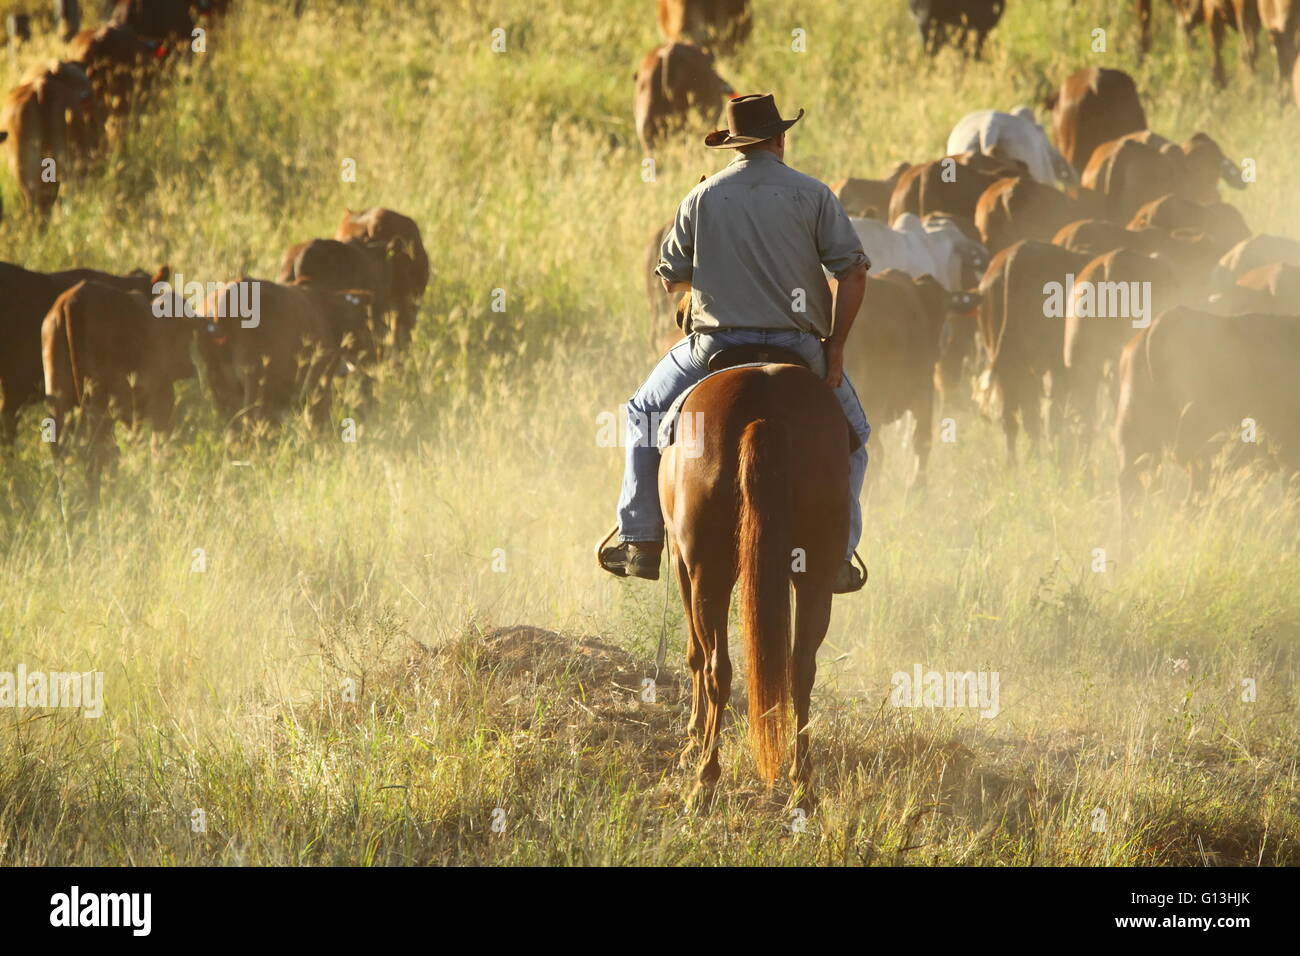 A lone drover on a horse watches over a mob of cattle near Eidsvold, Queensland, Australia during a cattle drive. Stock Photo